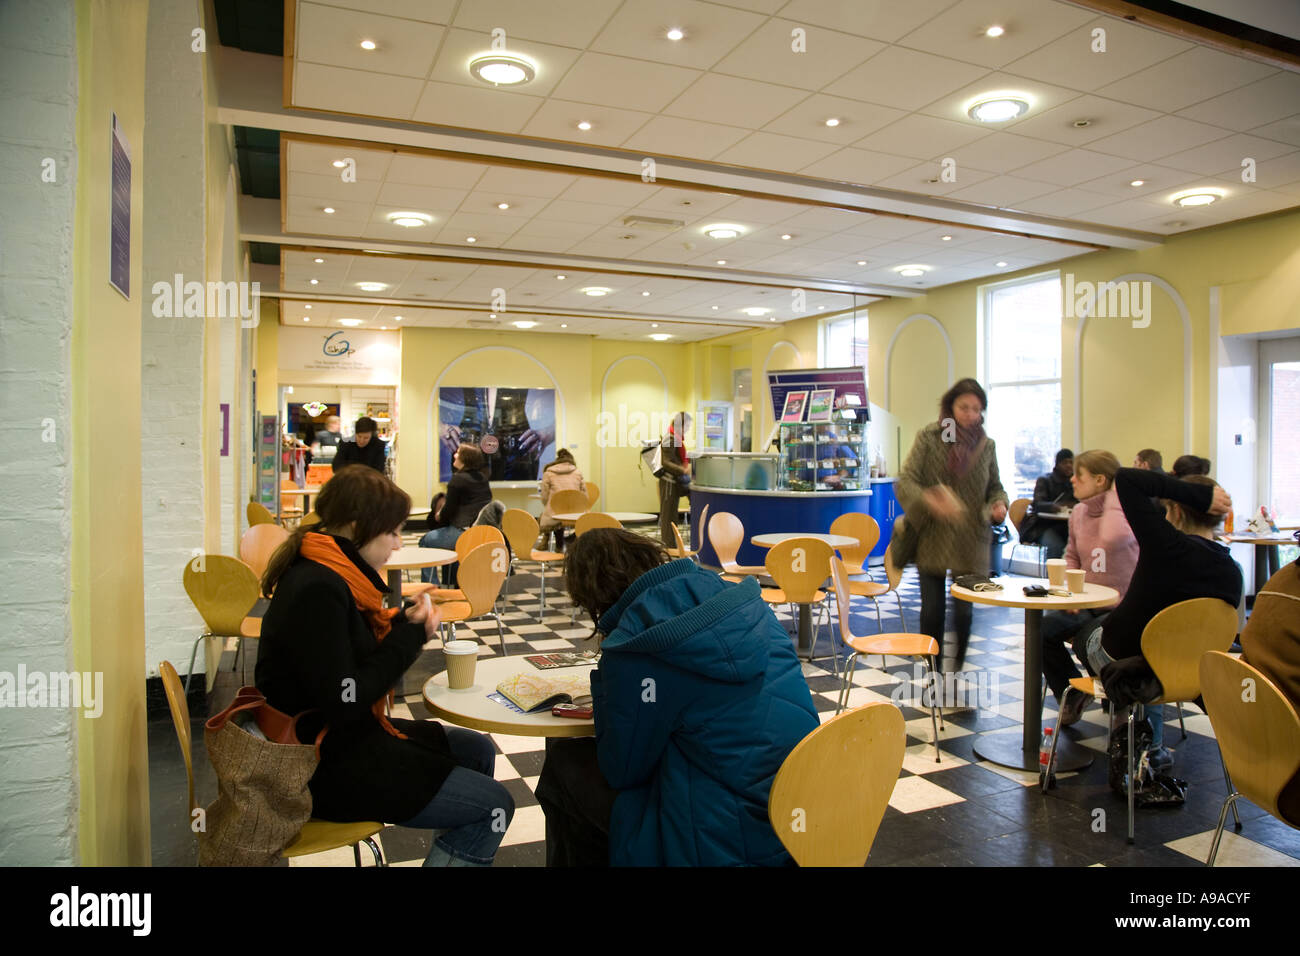 The cafe area at Goldsmiths College, University of London Stock Photo